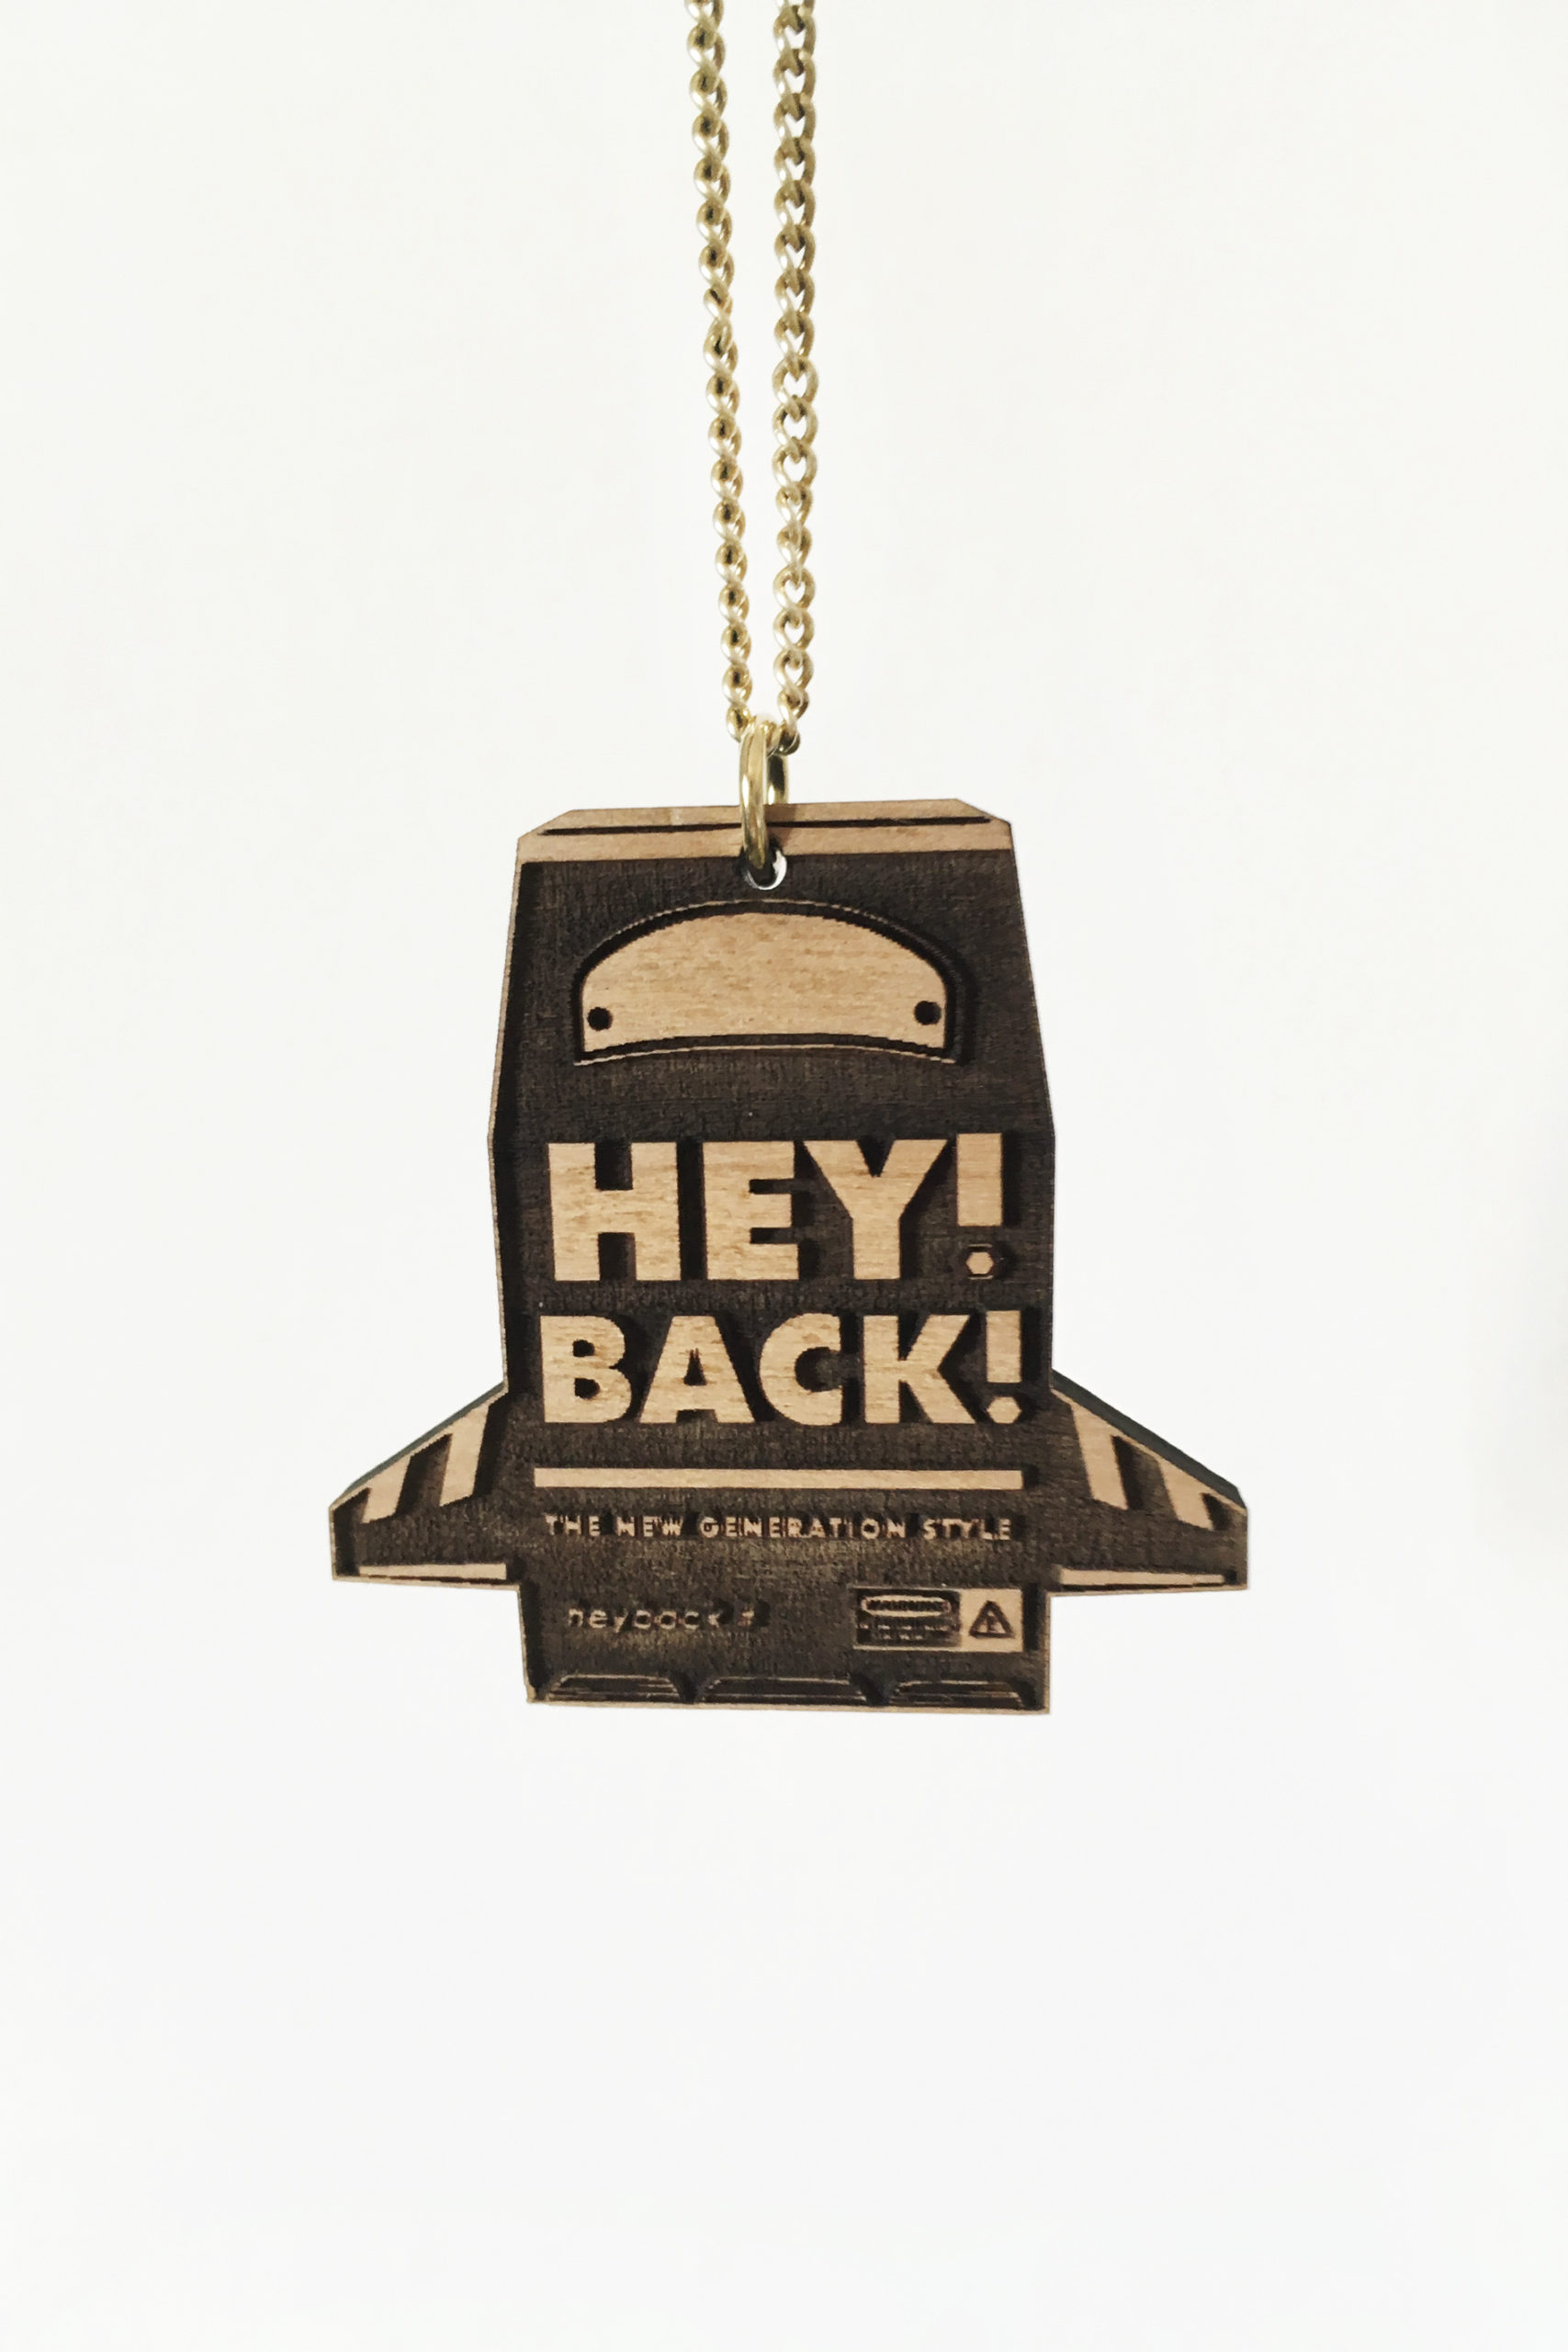 – SPACE BACK BLACK – NECKLACE HEY! BACK! COLLECTION